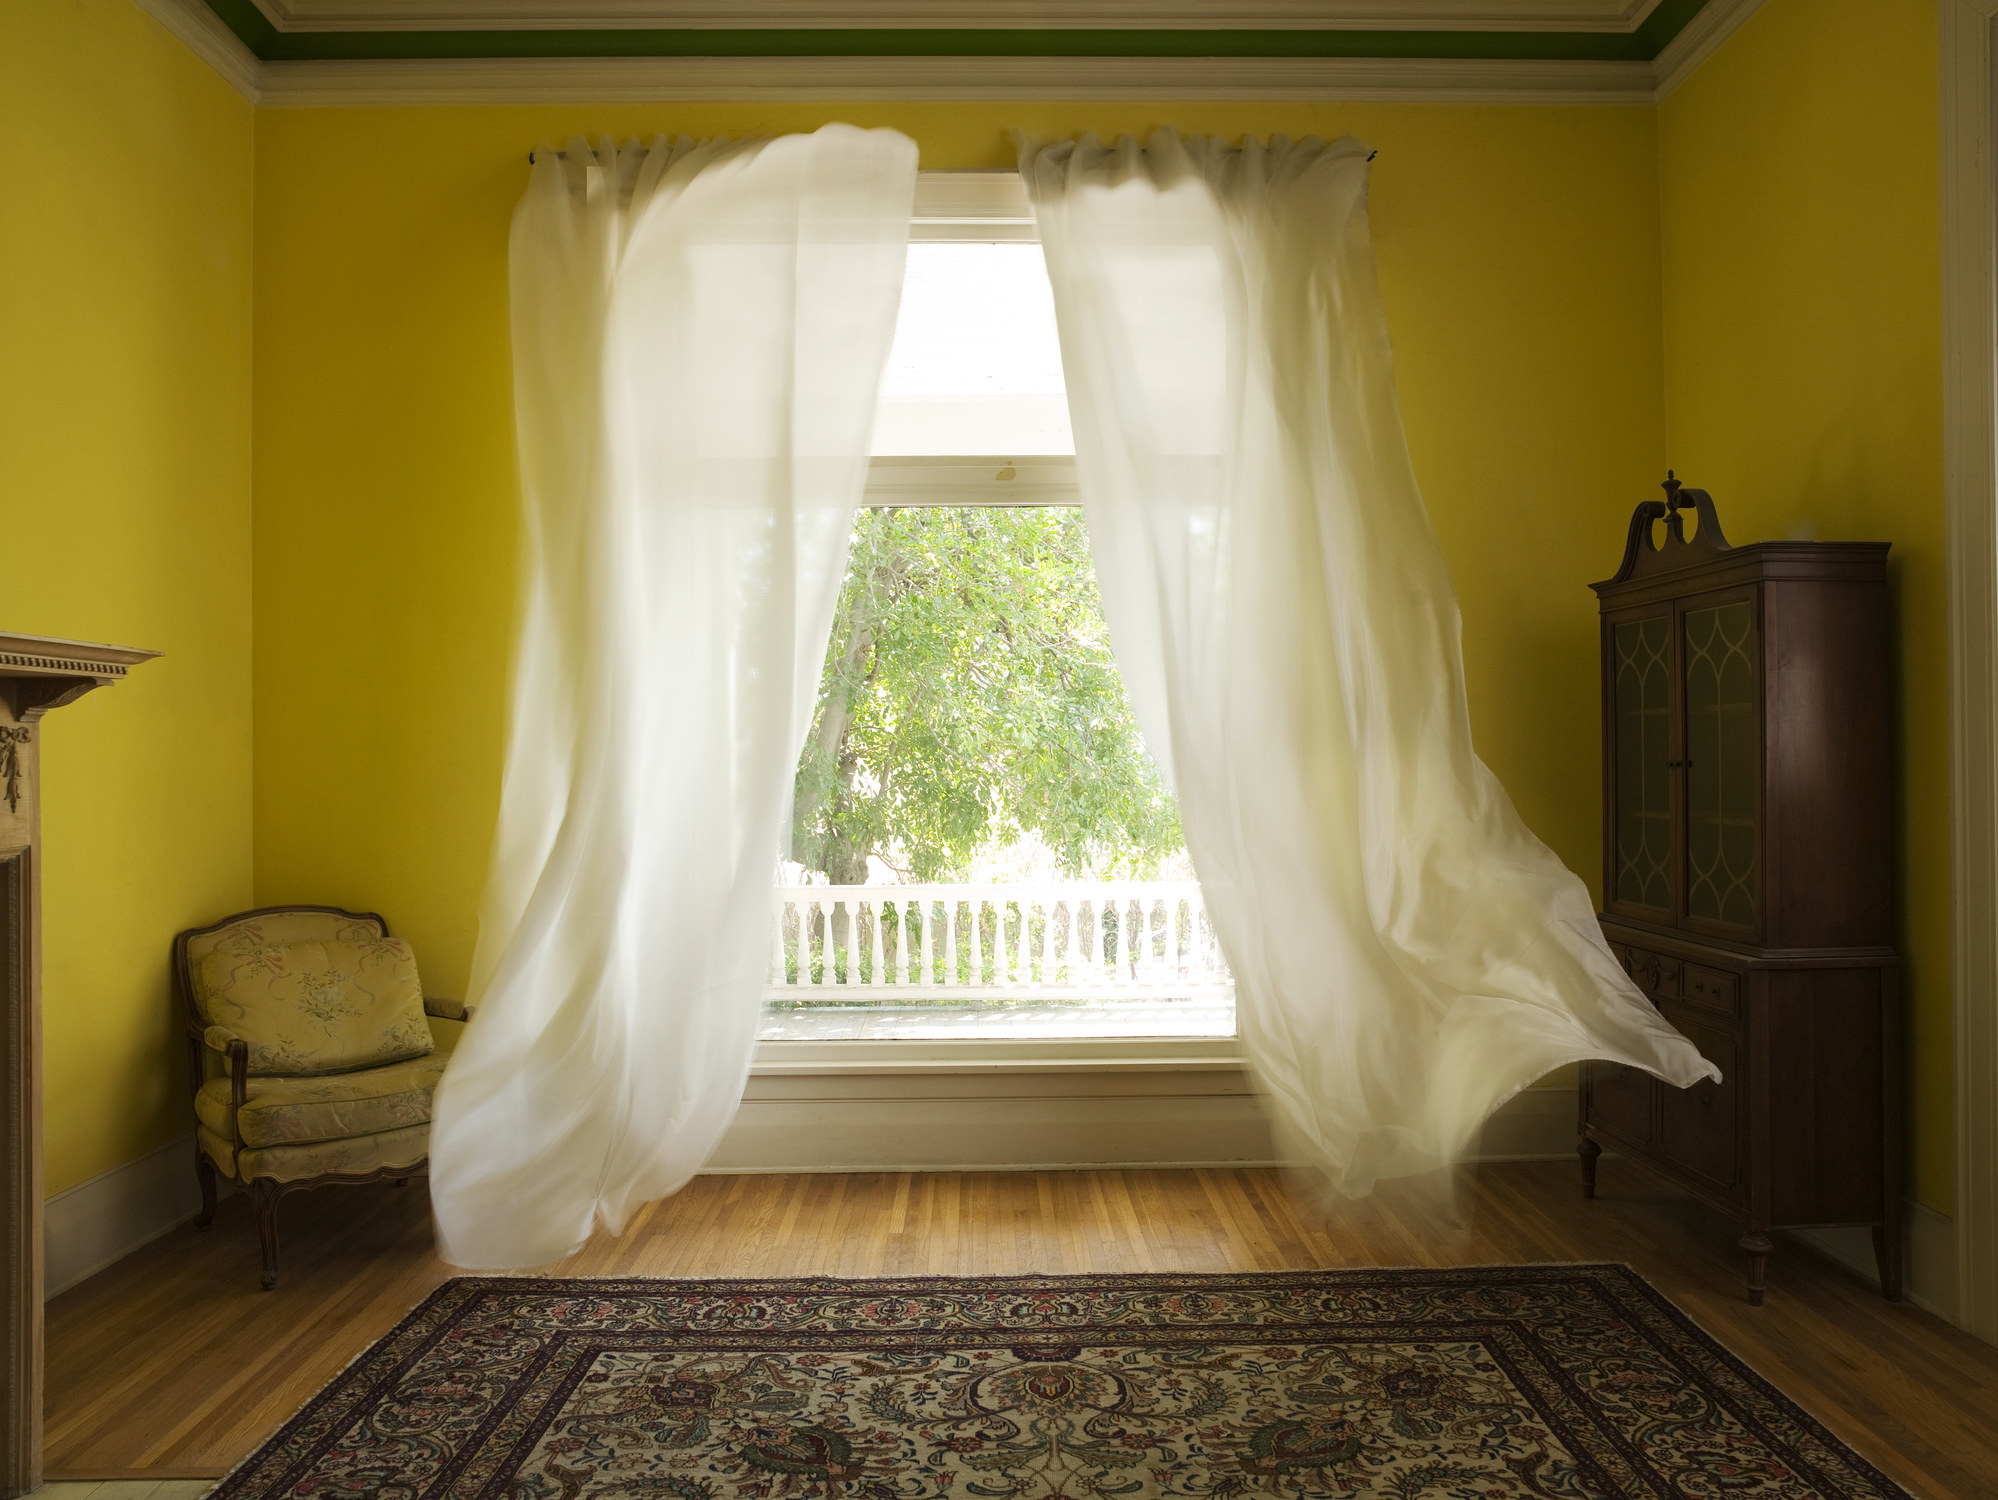 Room with curtains billowing at open window.